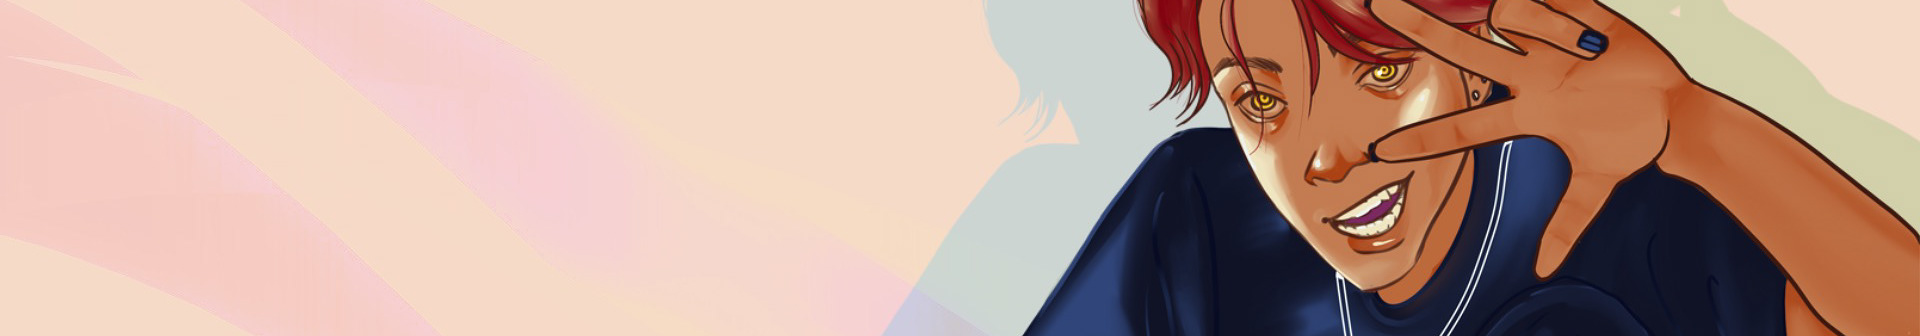 Anon Aster's profile banner